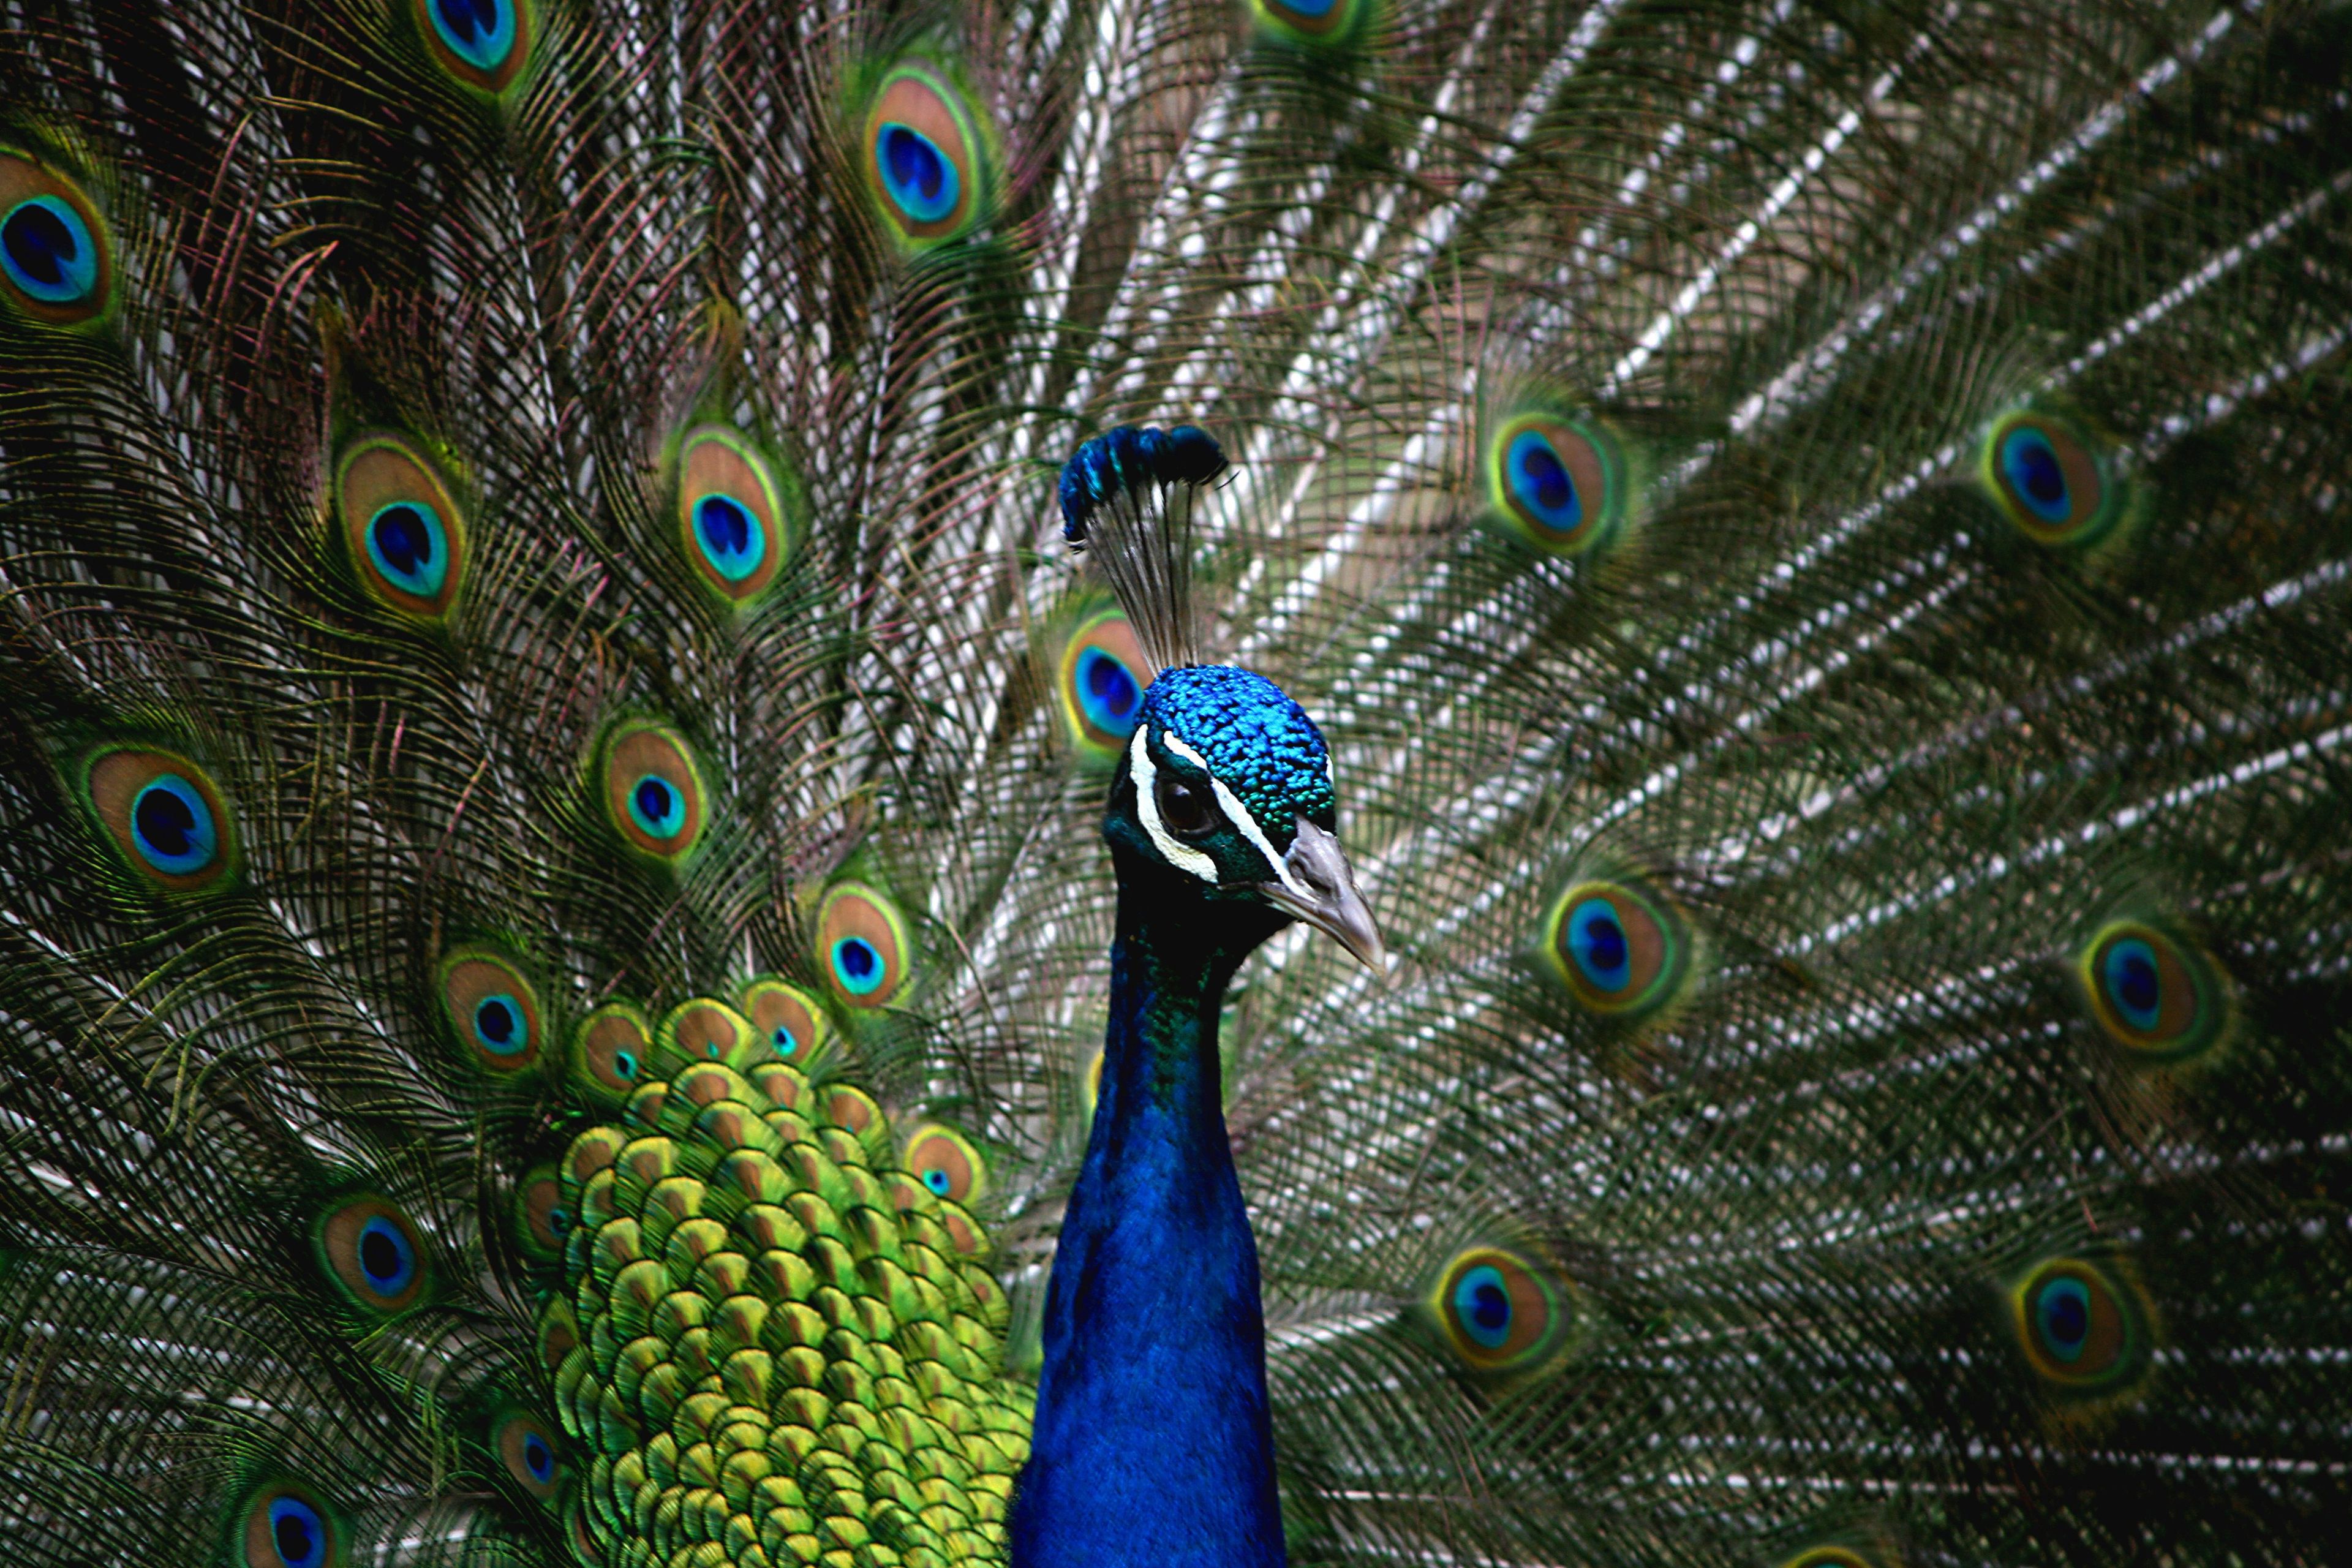 A peacock with its feathers fanned out.